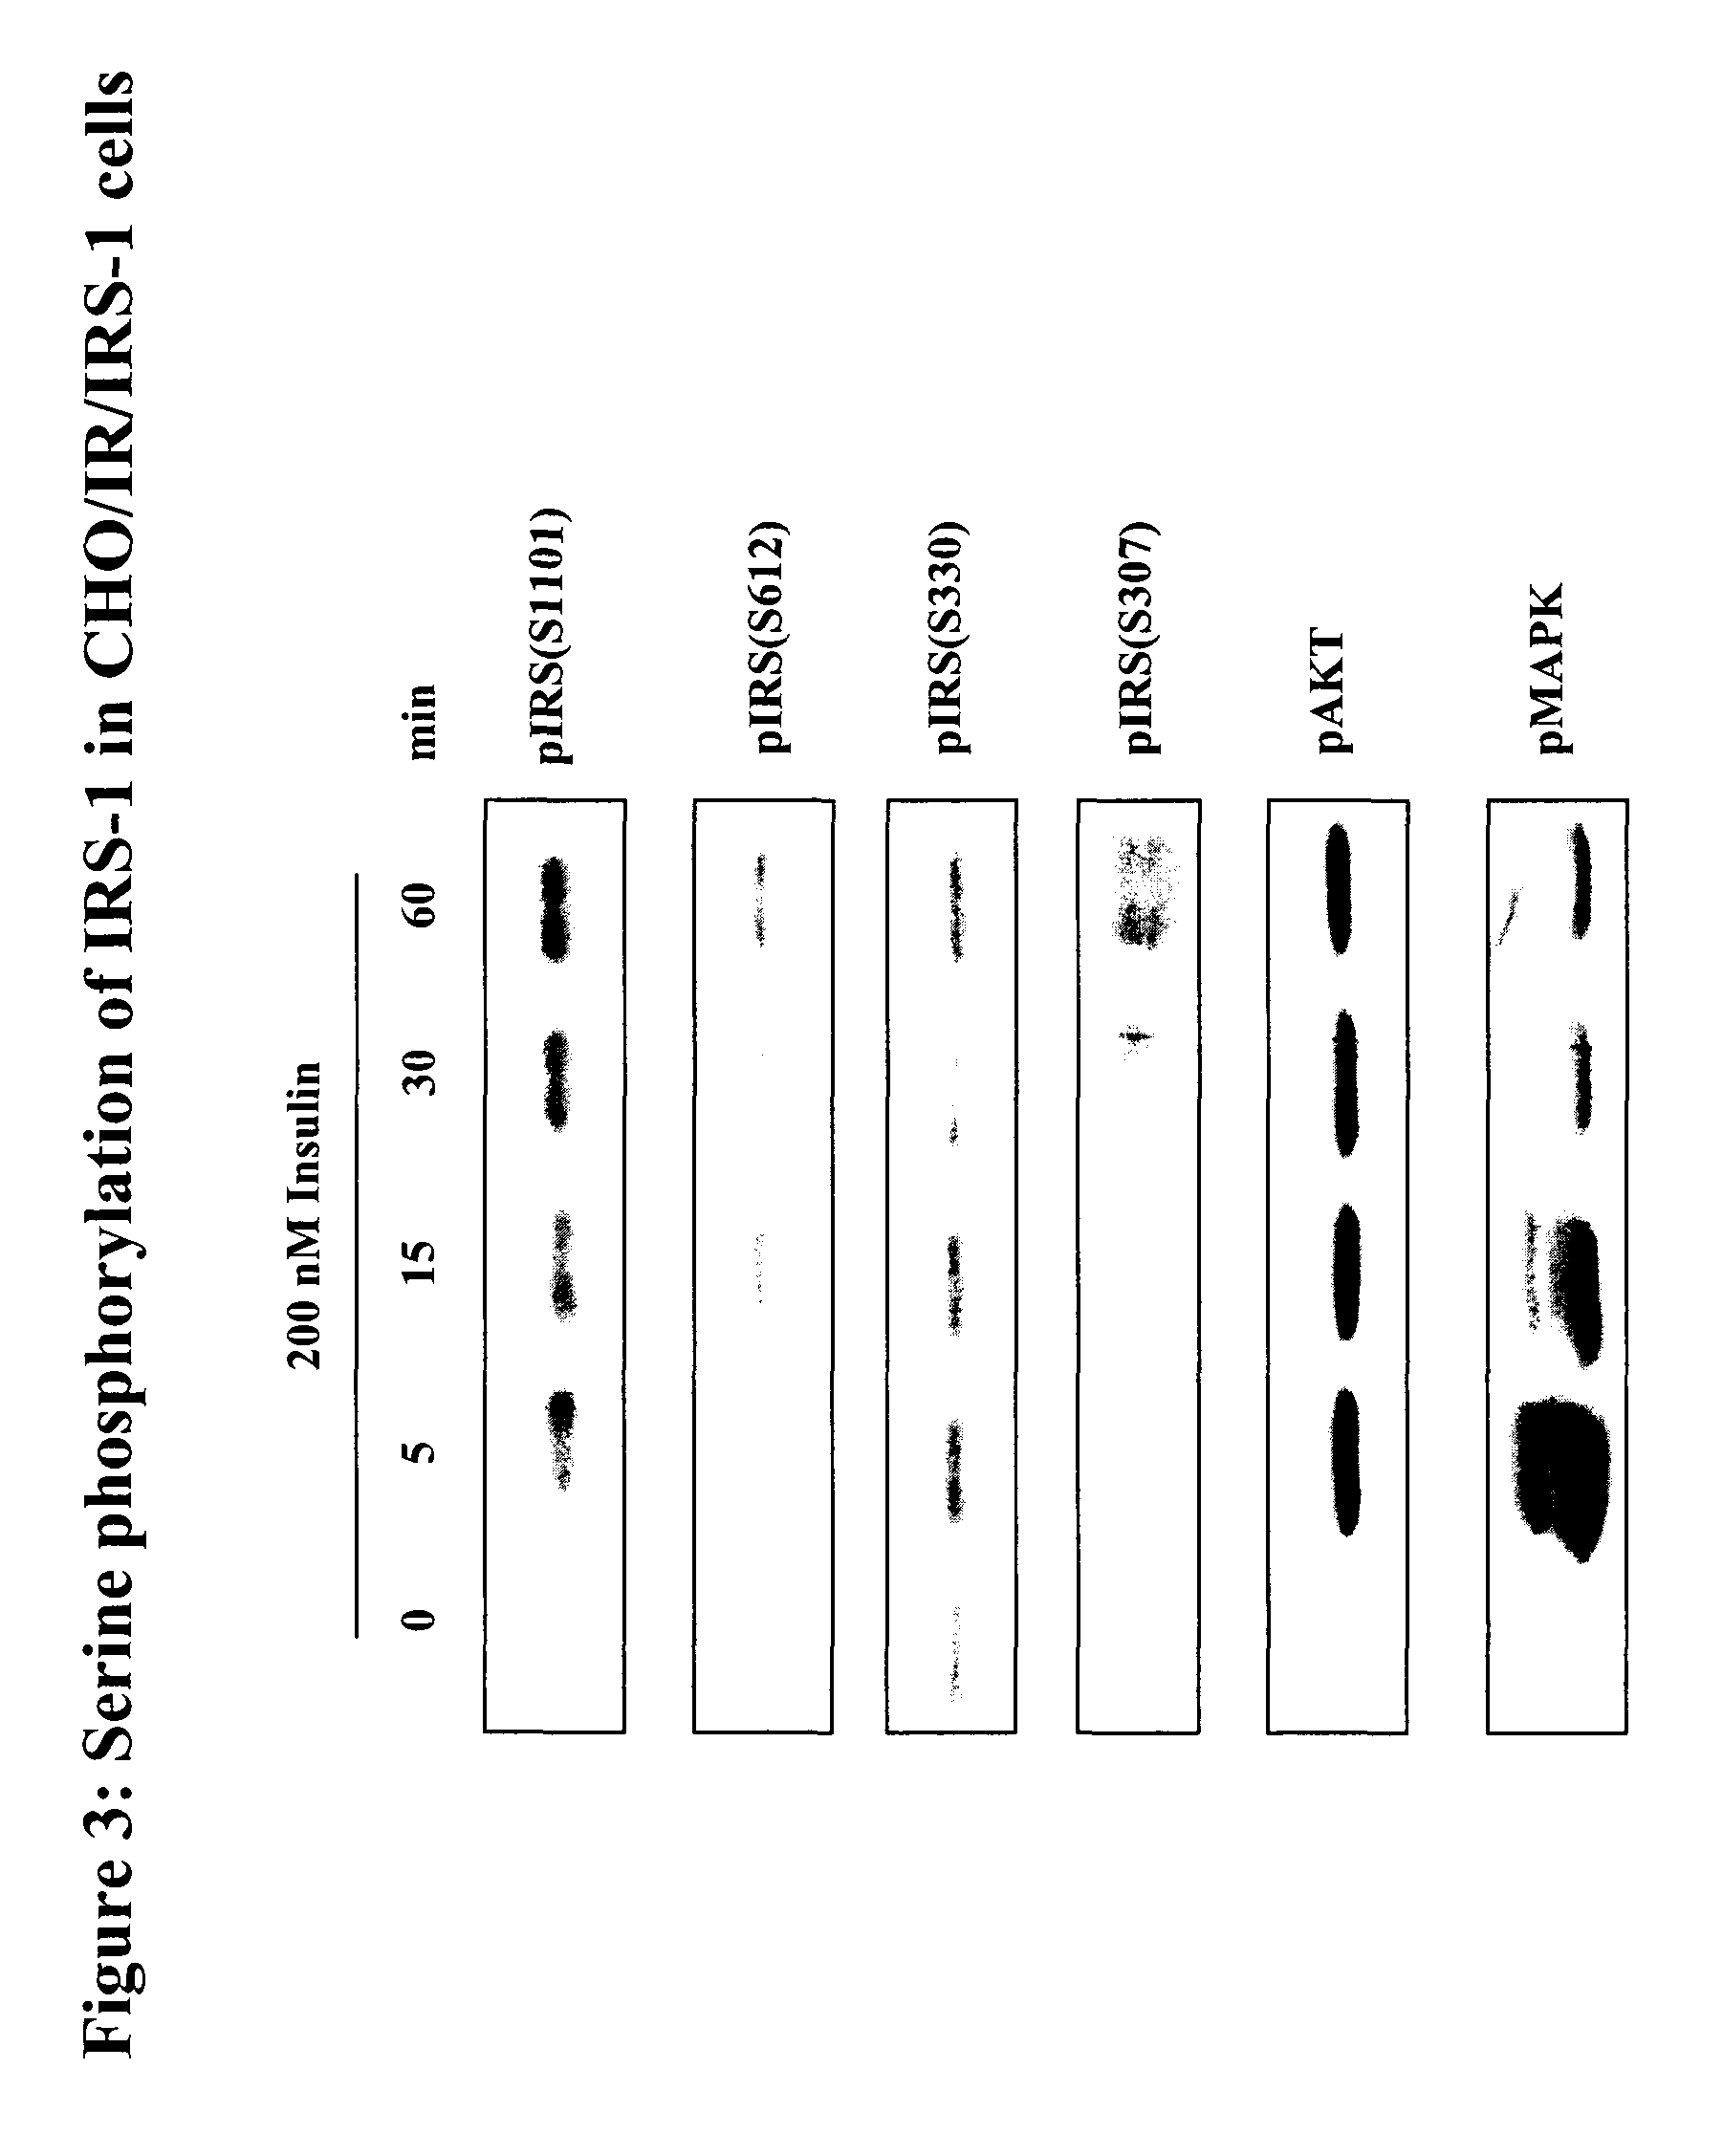 Antibodies specific for phosphorylated insulin receptor substrate-1/2 (Ser1101/Ser1149) and uses thereof